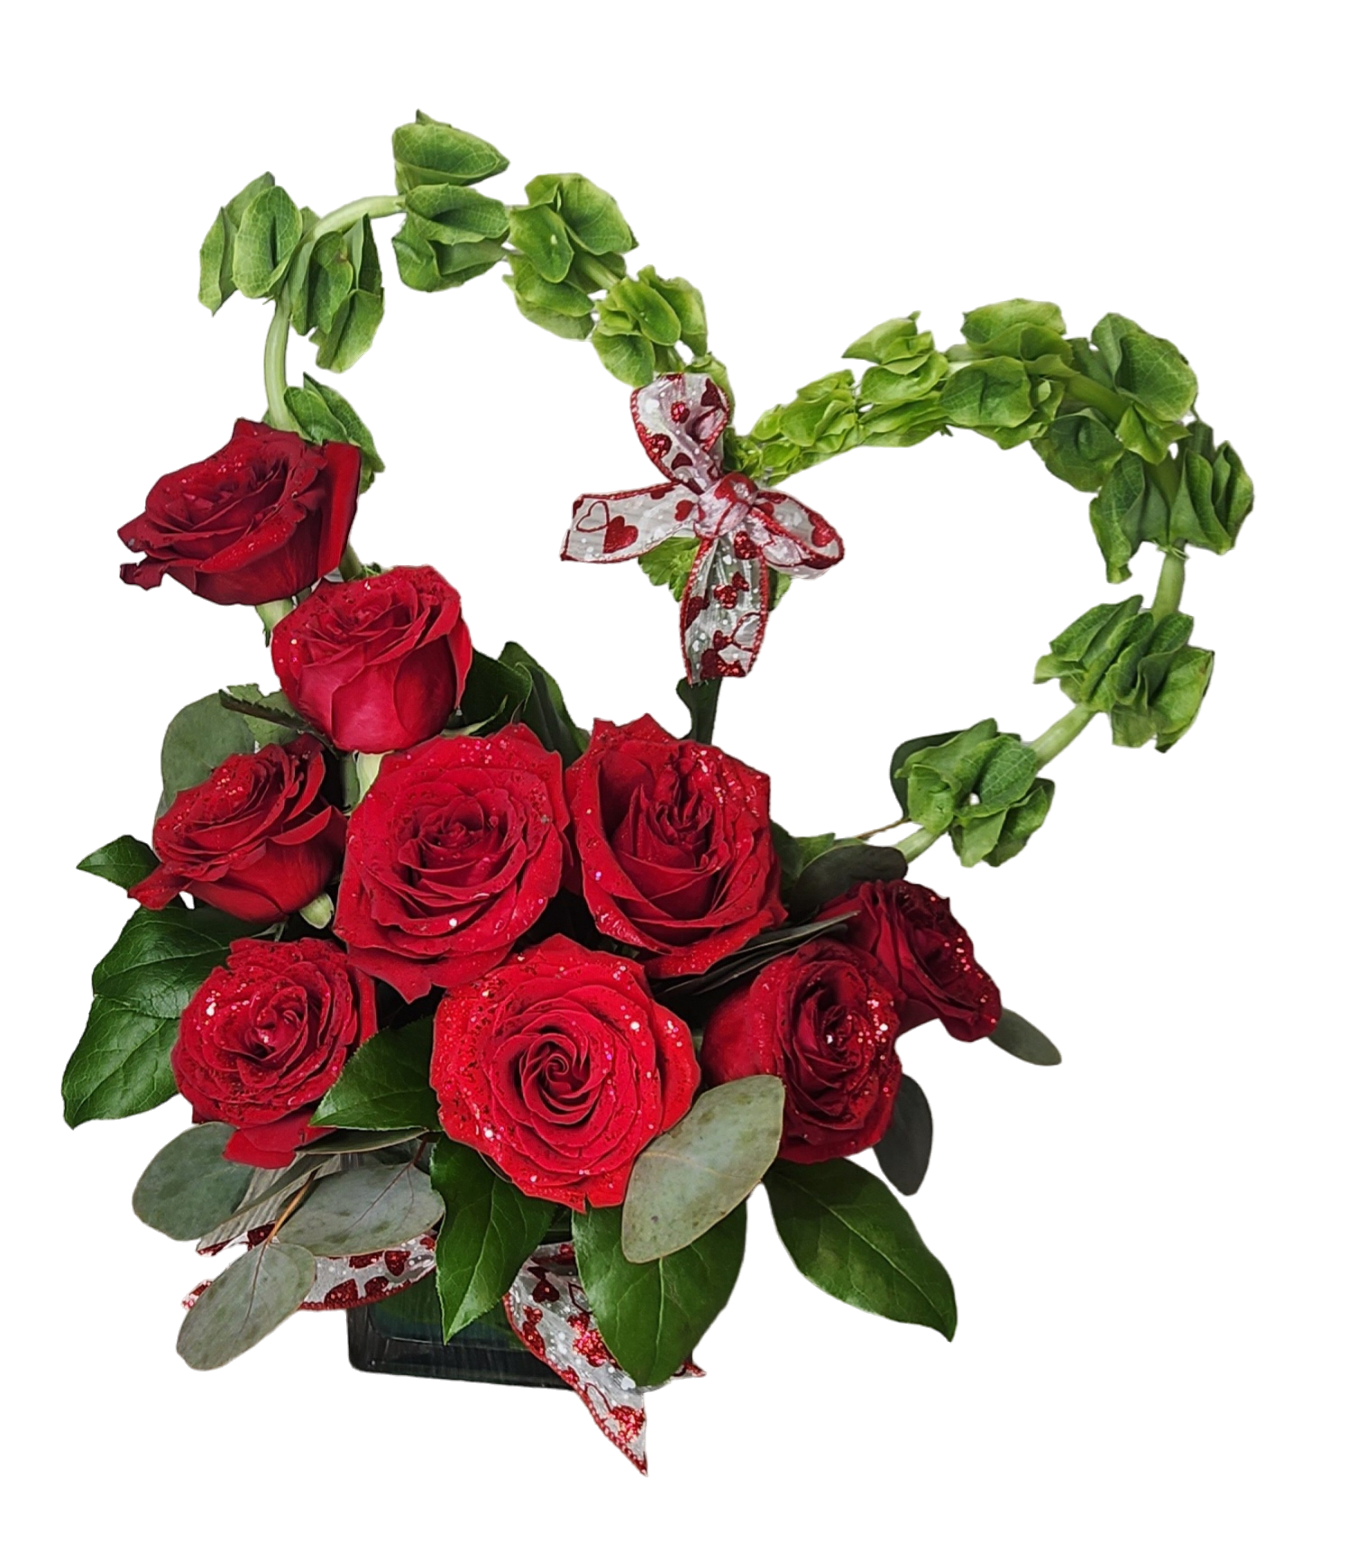 Lovin' On You - Show that special someone how you feel! This delightful design will get them smiling. Look close, glittered roses abound.